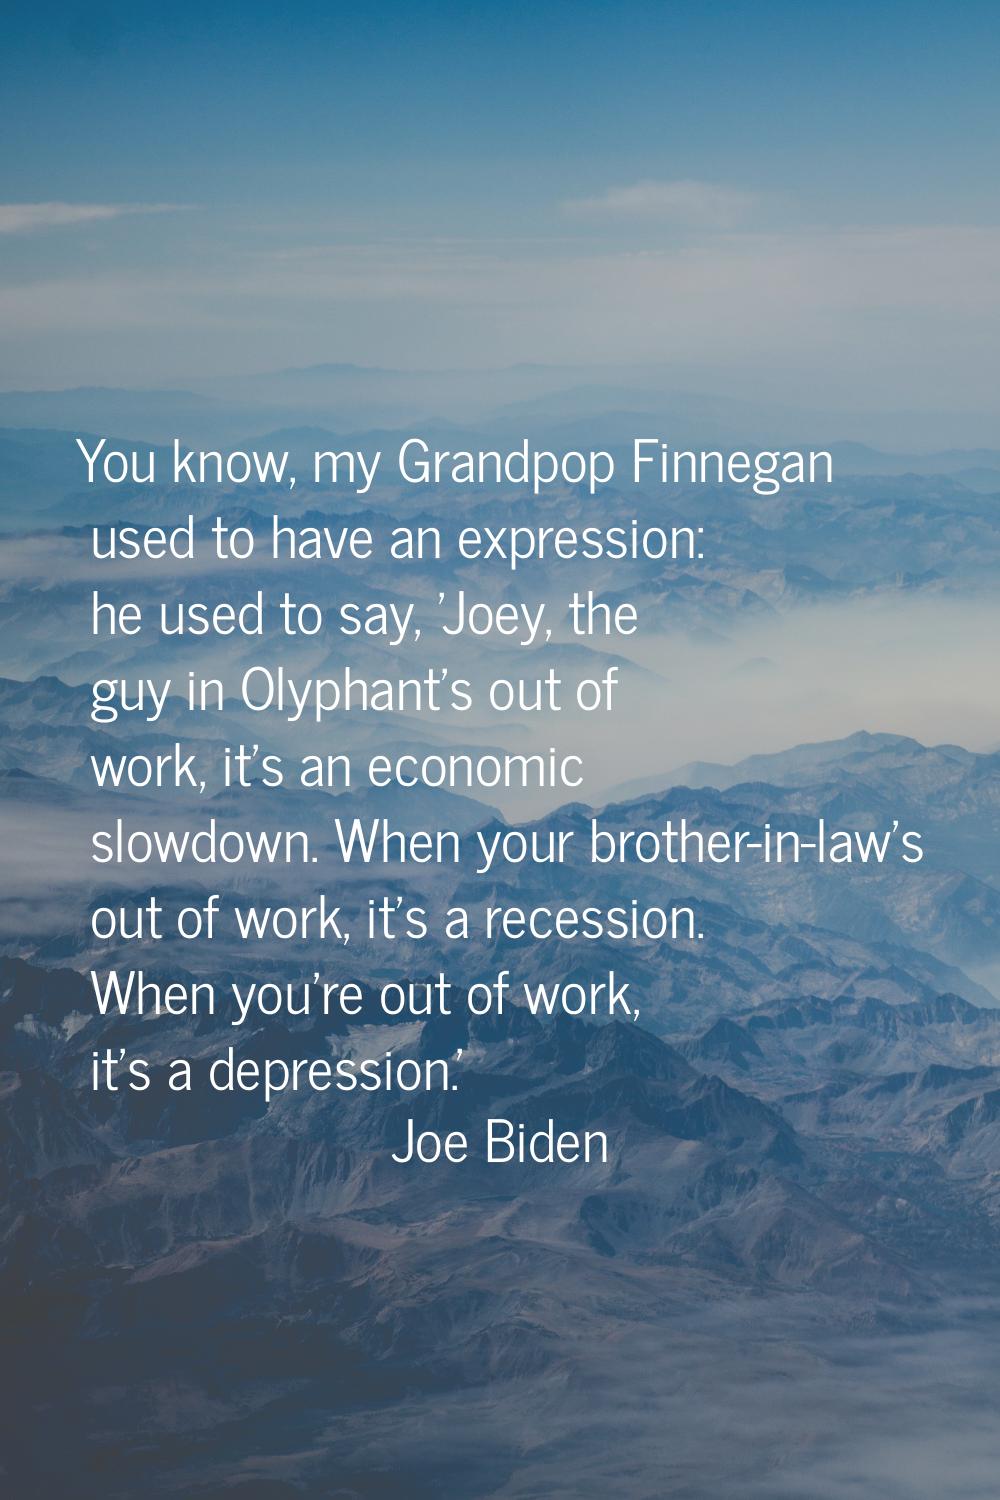 You know, my Grandpop Finnegan used to have an expression: he used to say, 'Joey, the guy in Olypha